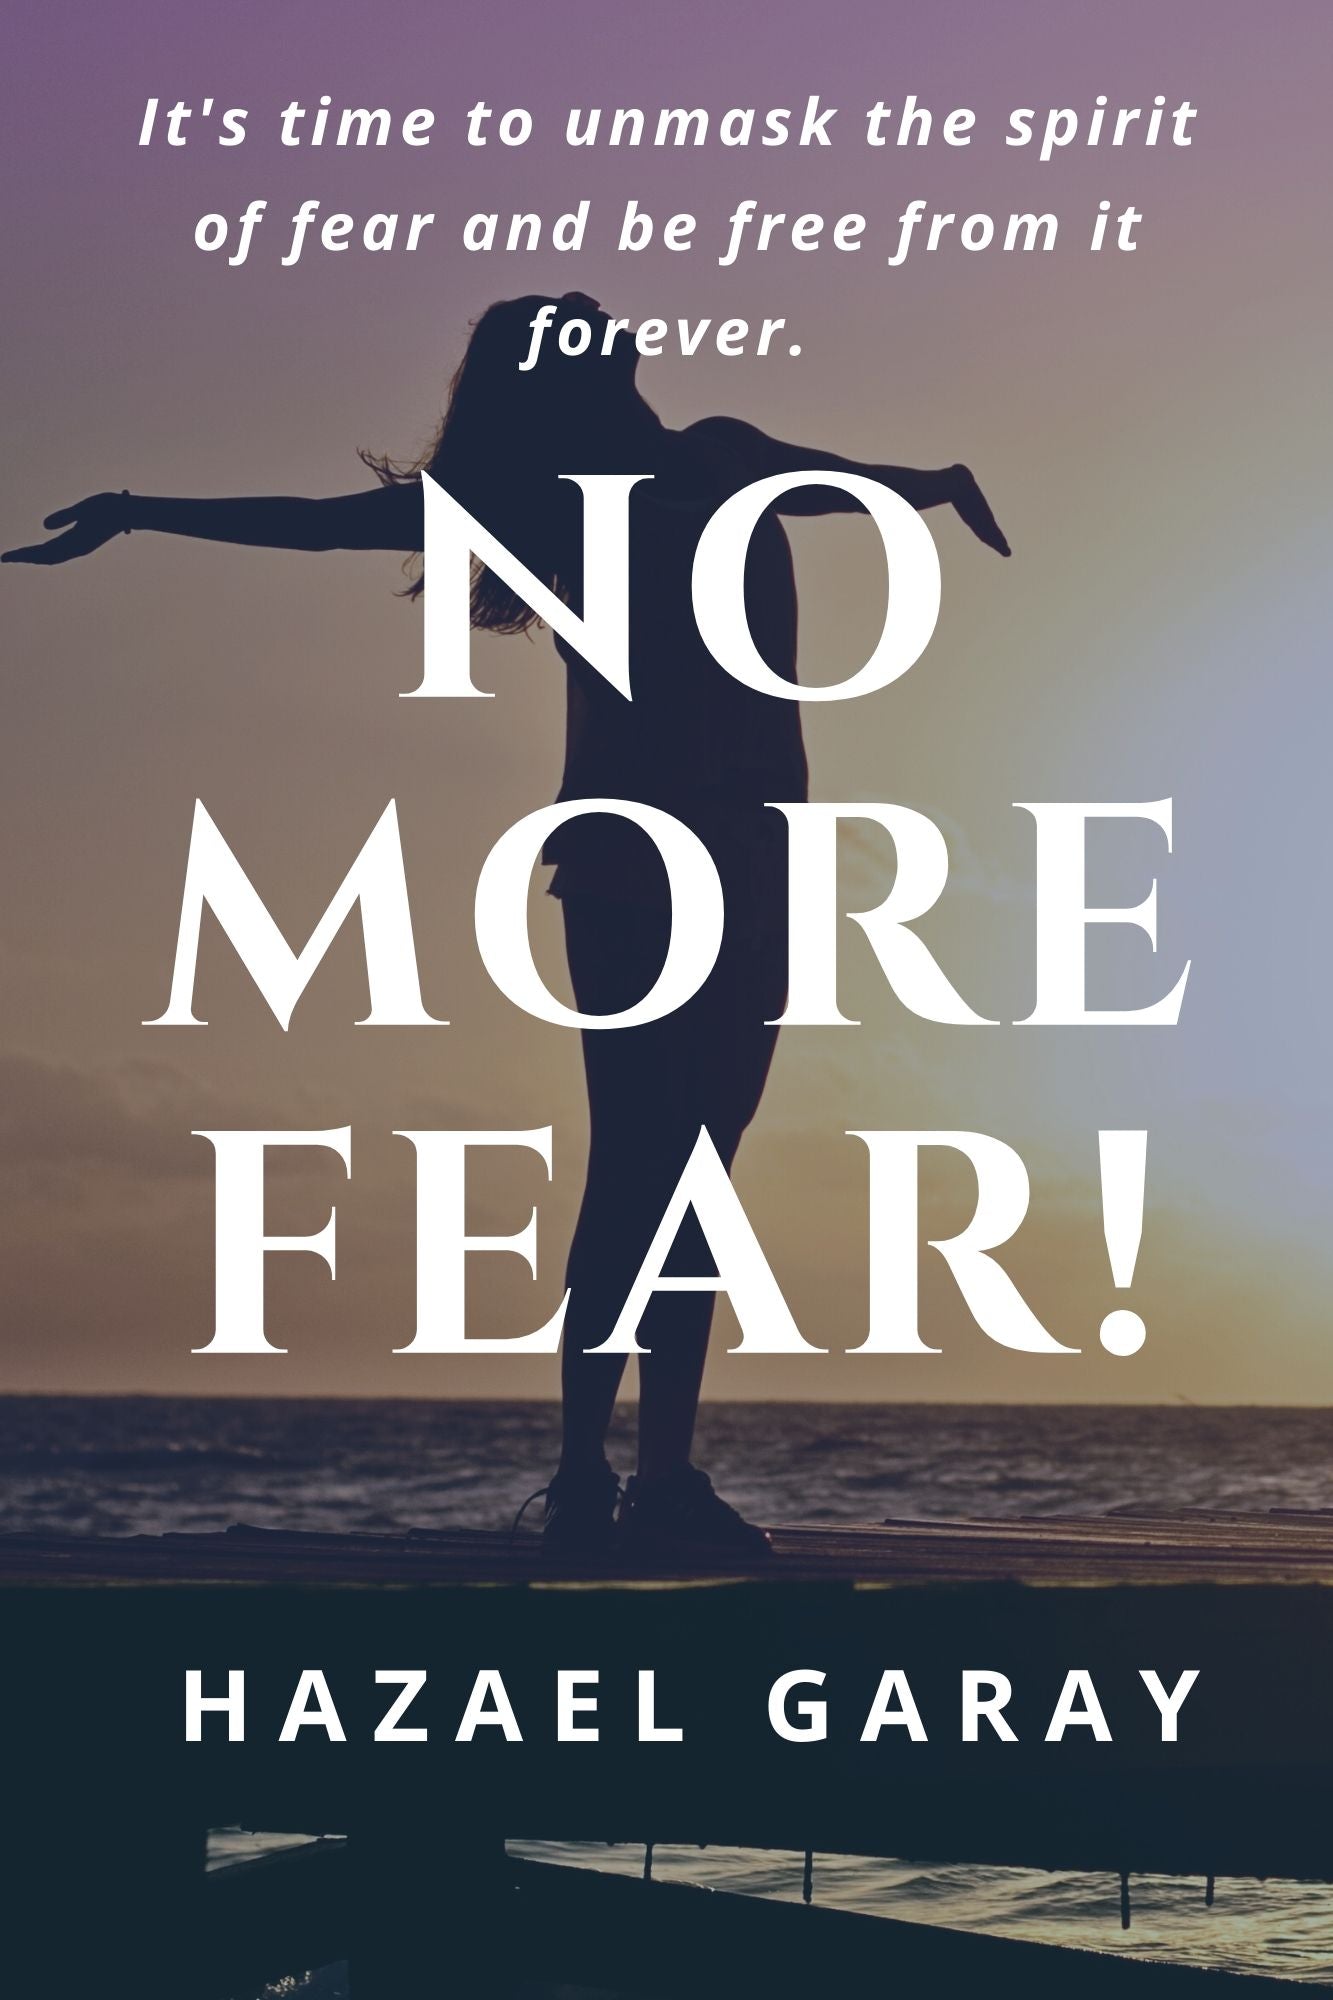 Buy No More Fear Book for Anxiety Relief